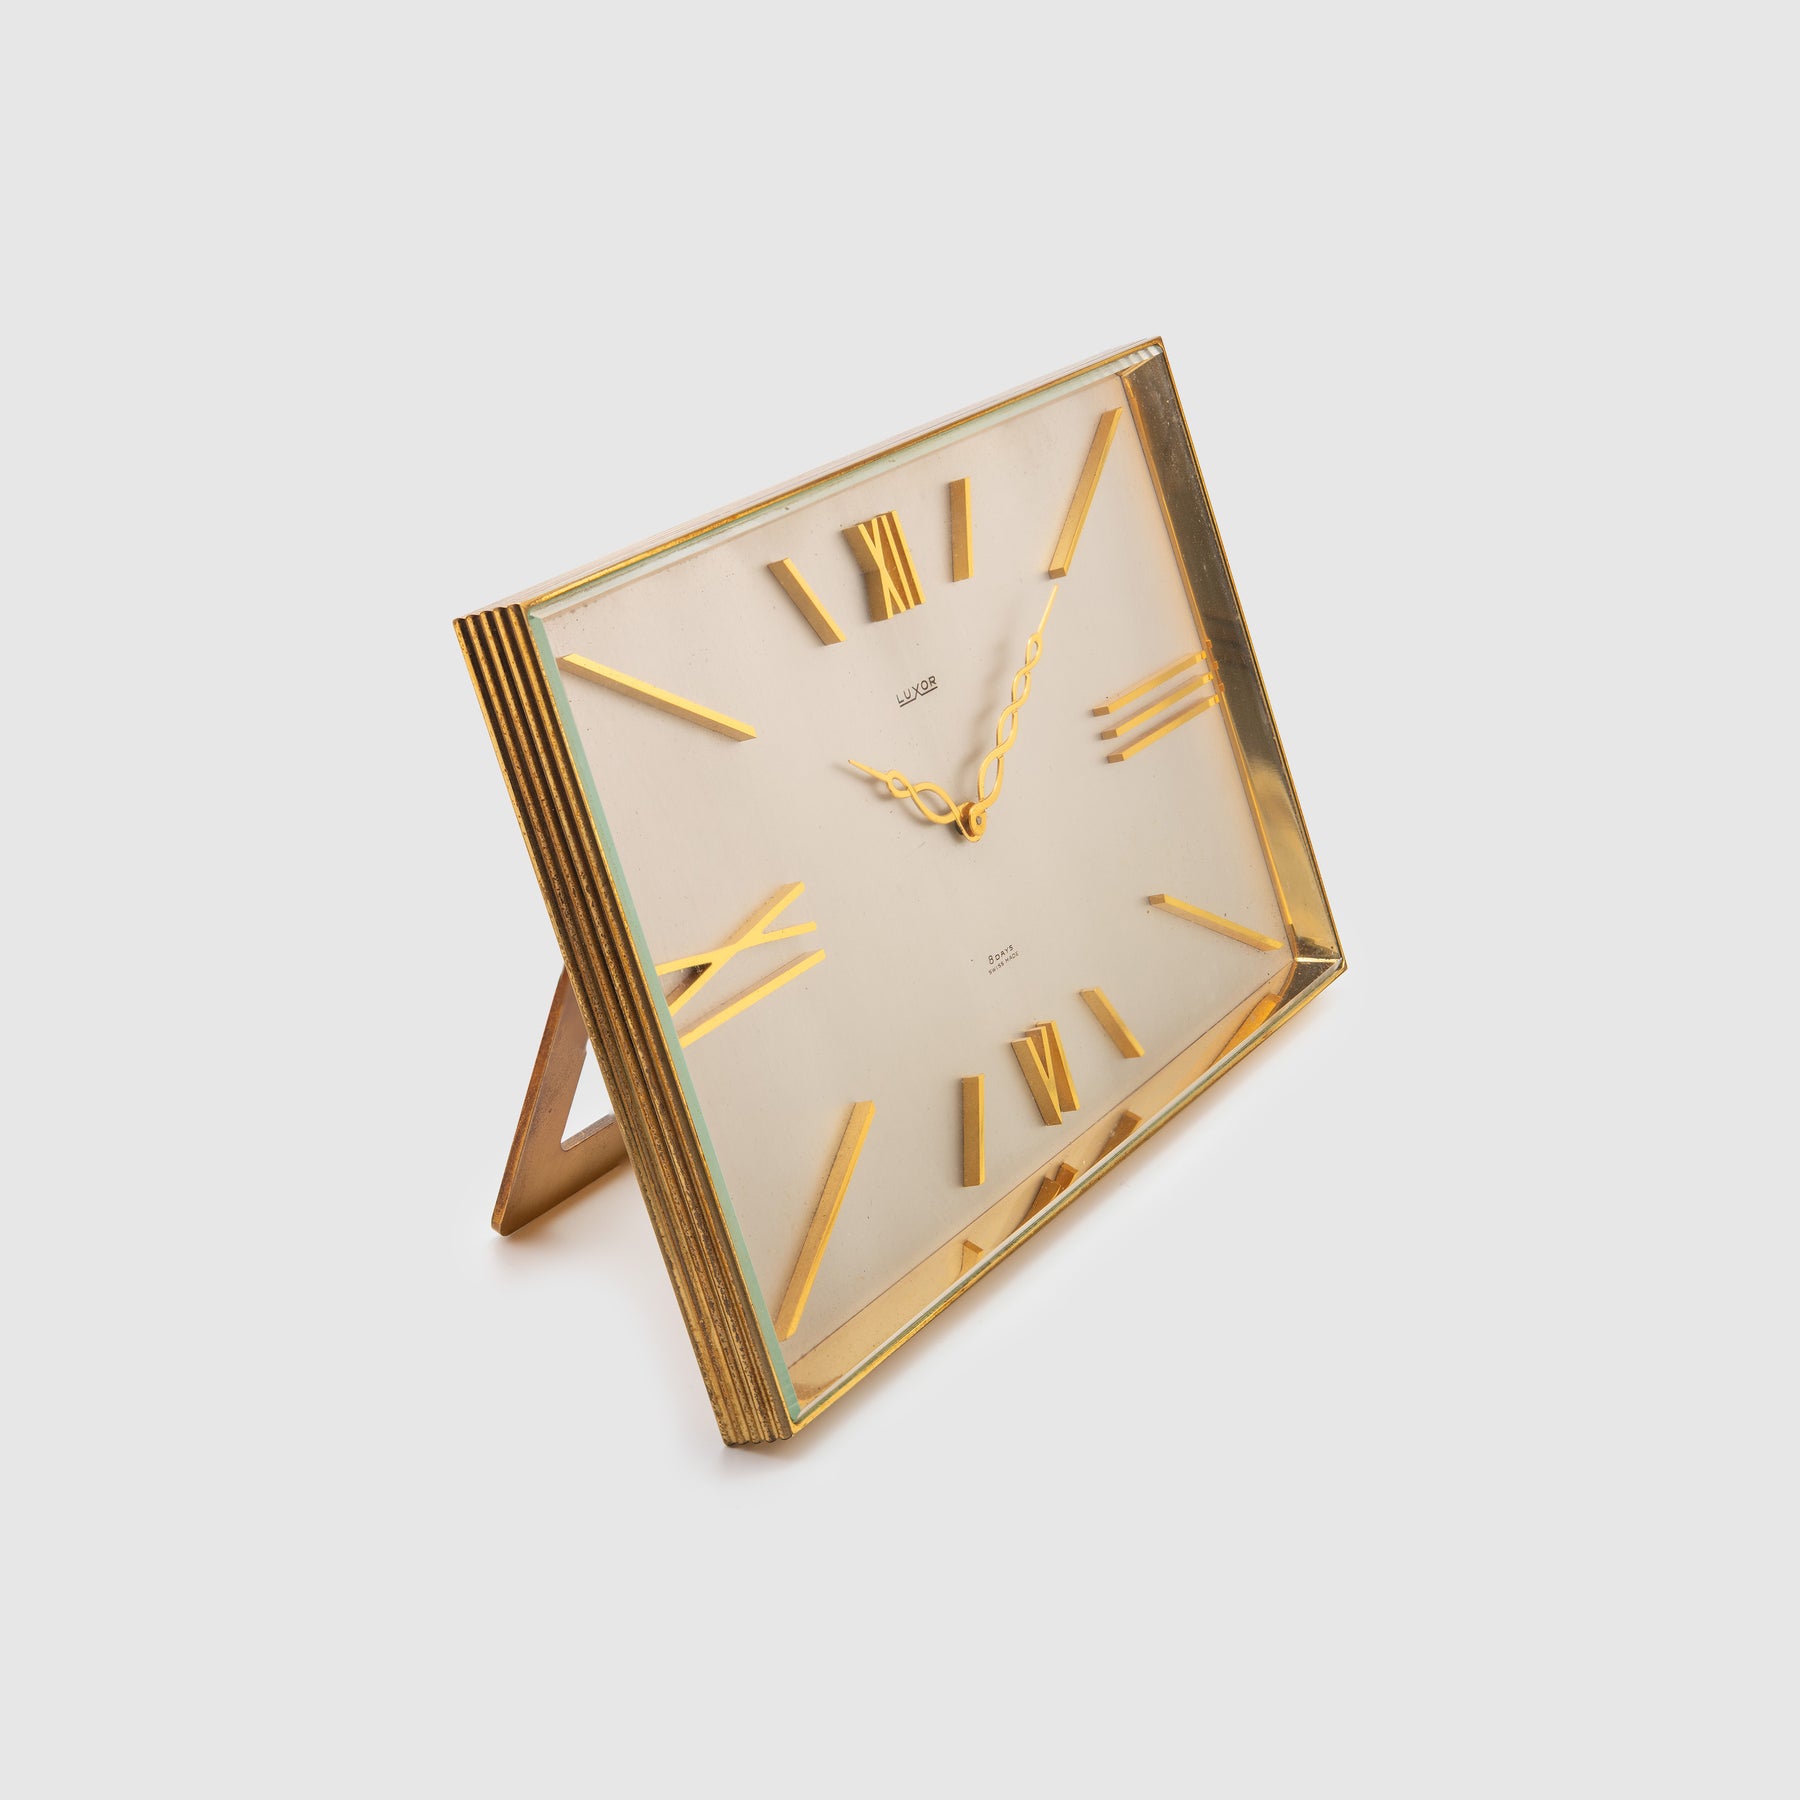 Luxor Desk Clock with Box & Papers